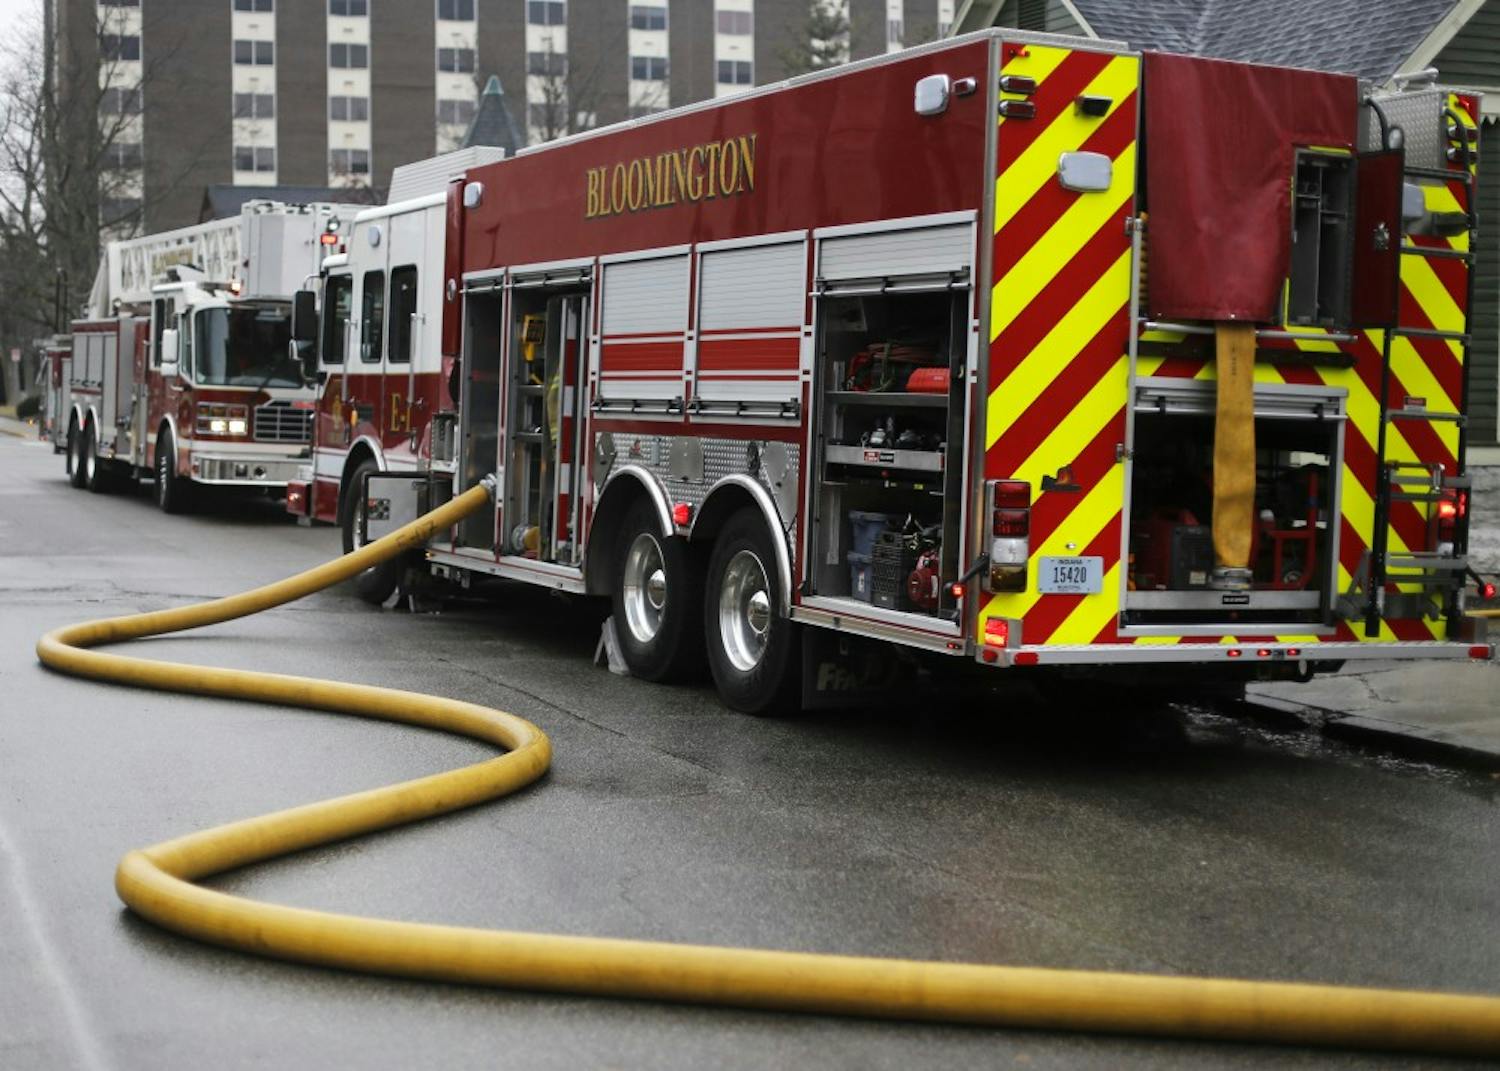 Bloomington placed in the top 1 percent of the 1,593 Indiana communities with a fire department for Bloomington Fire Department's recent public protection rating. The city received a score of ISO Class 2/2x rating.